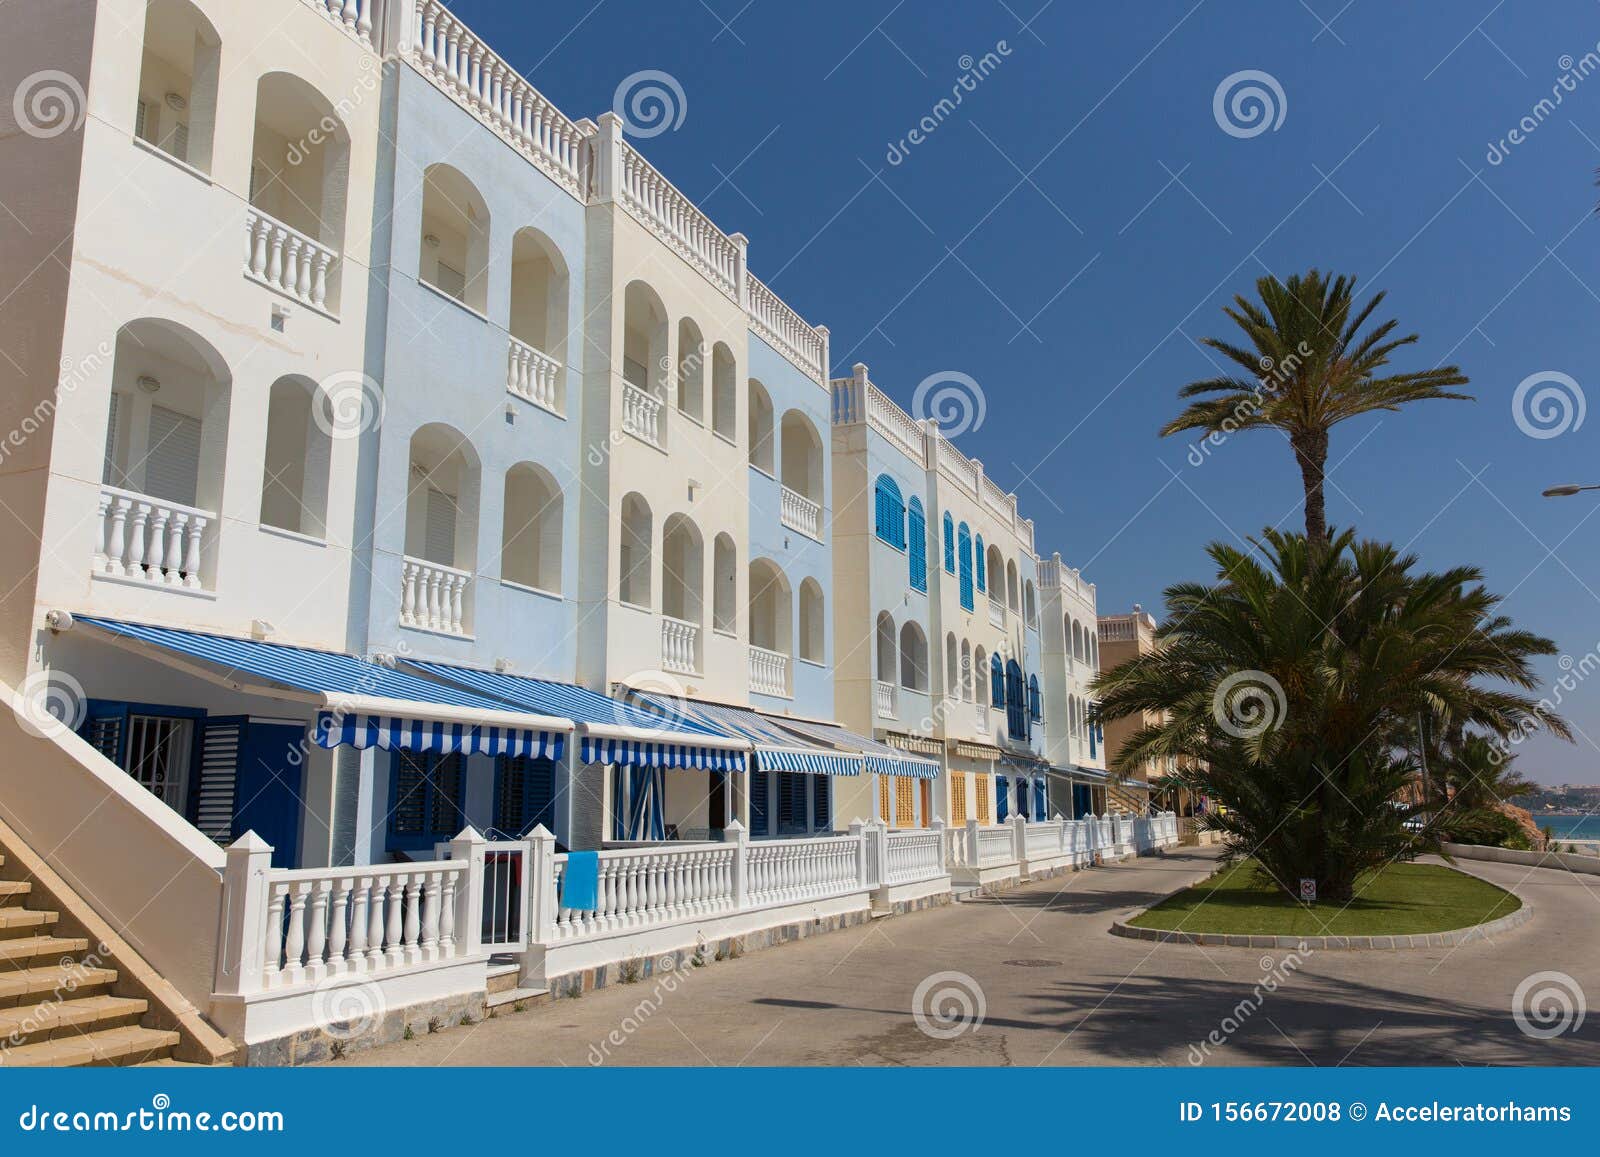 mil palmeras costa blanca spain with seafront apartments